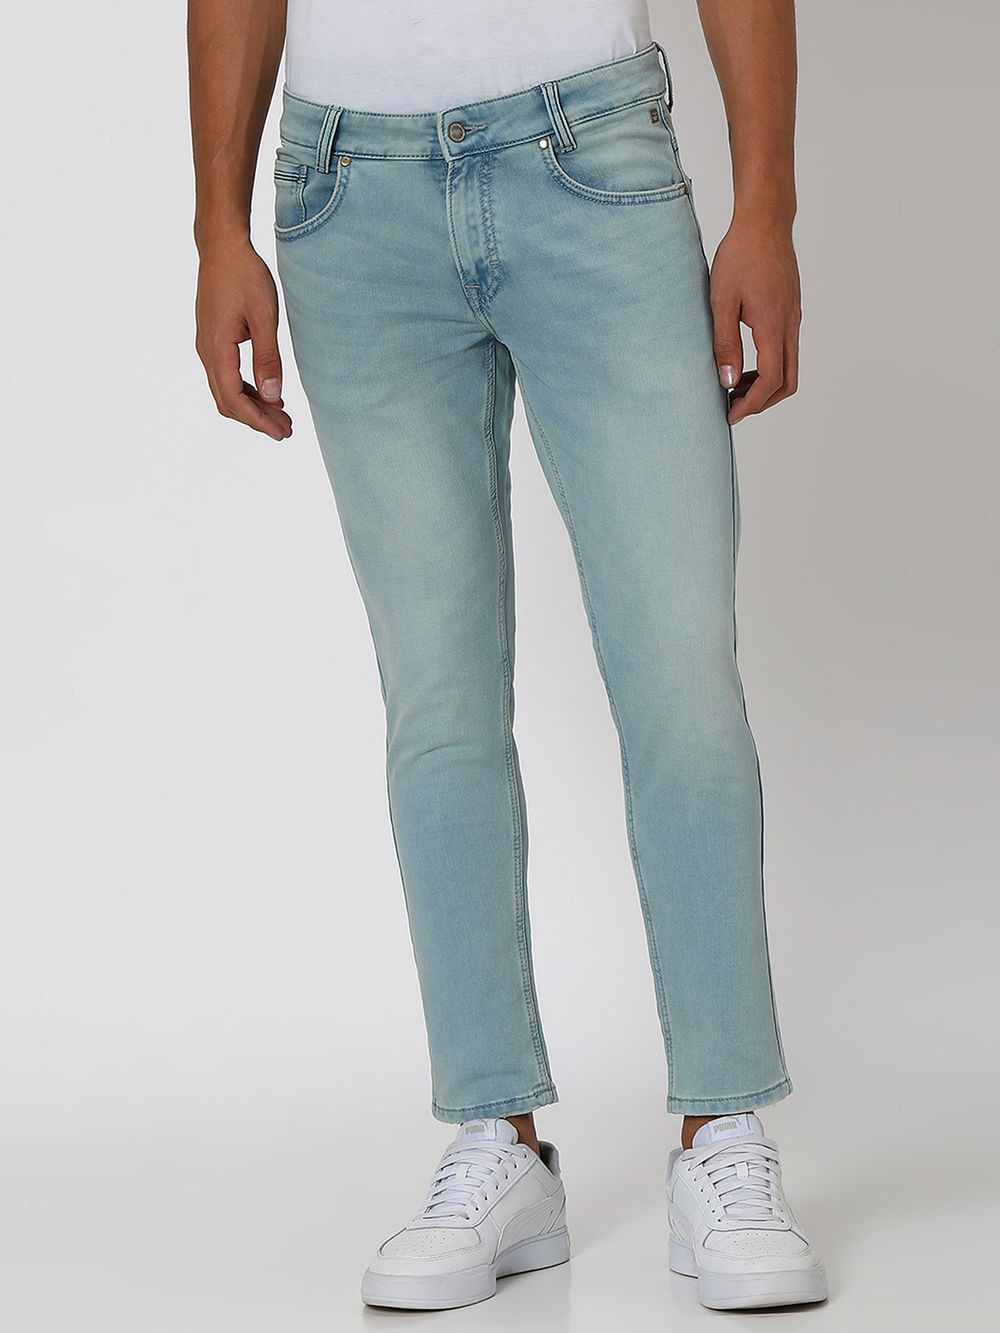 Tinted Ankle Length Denim Deluxe Stretch Jeans